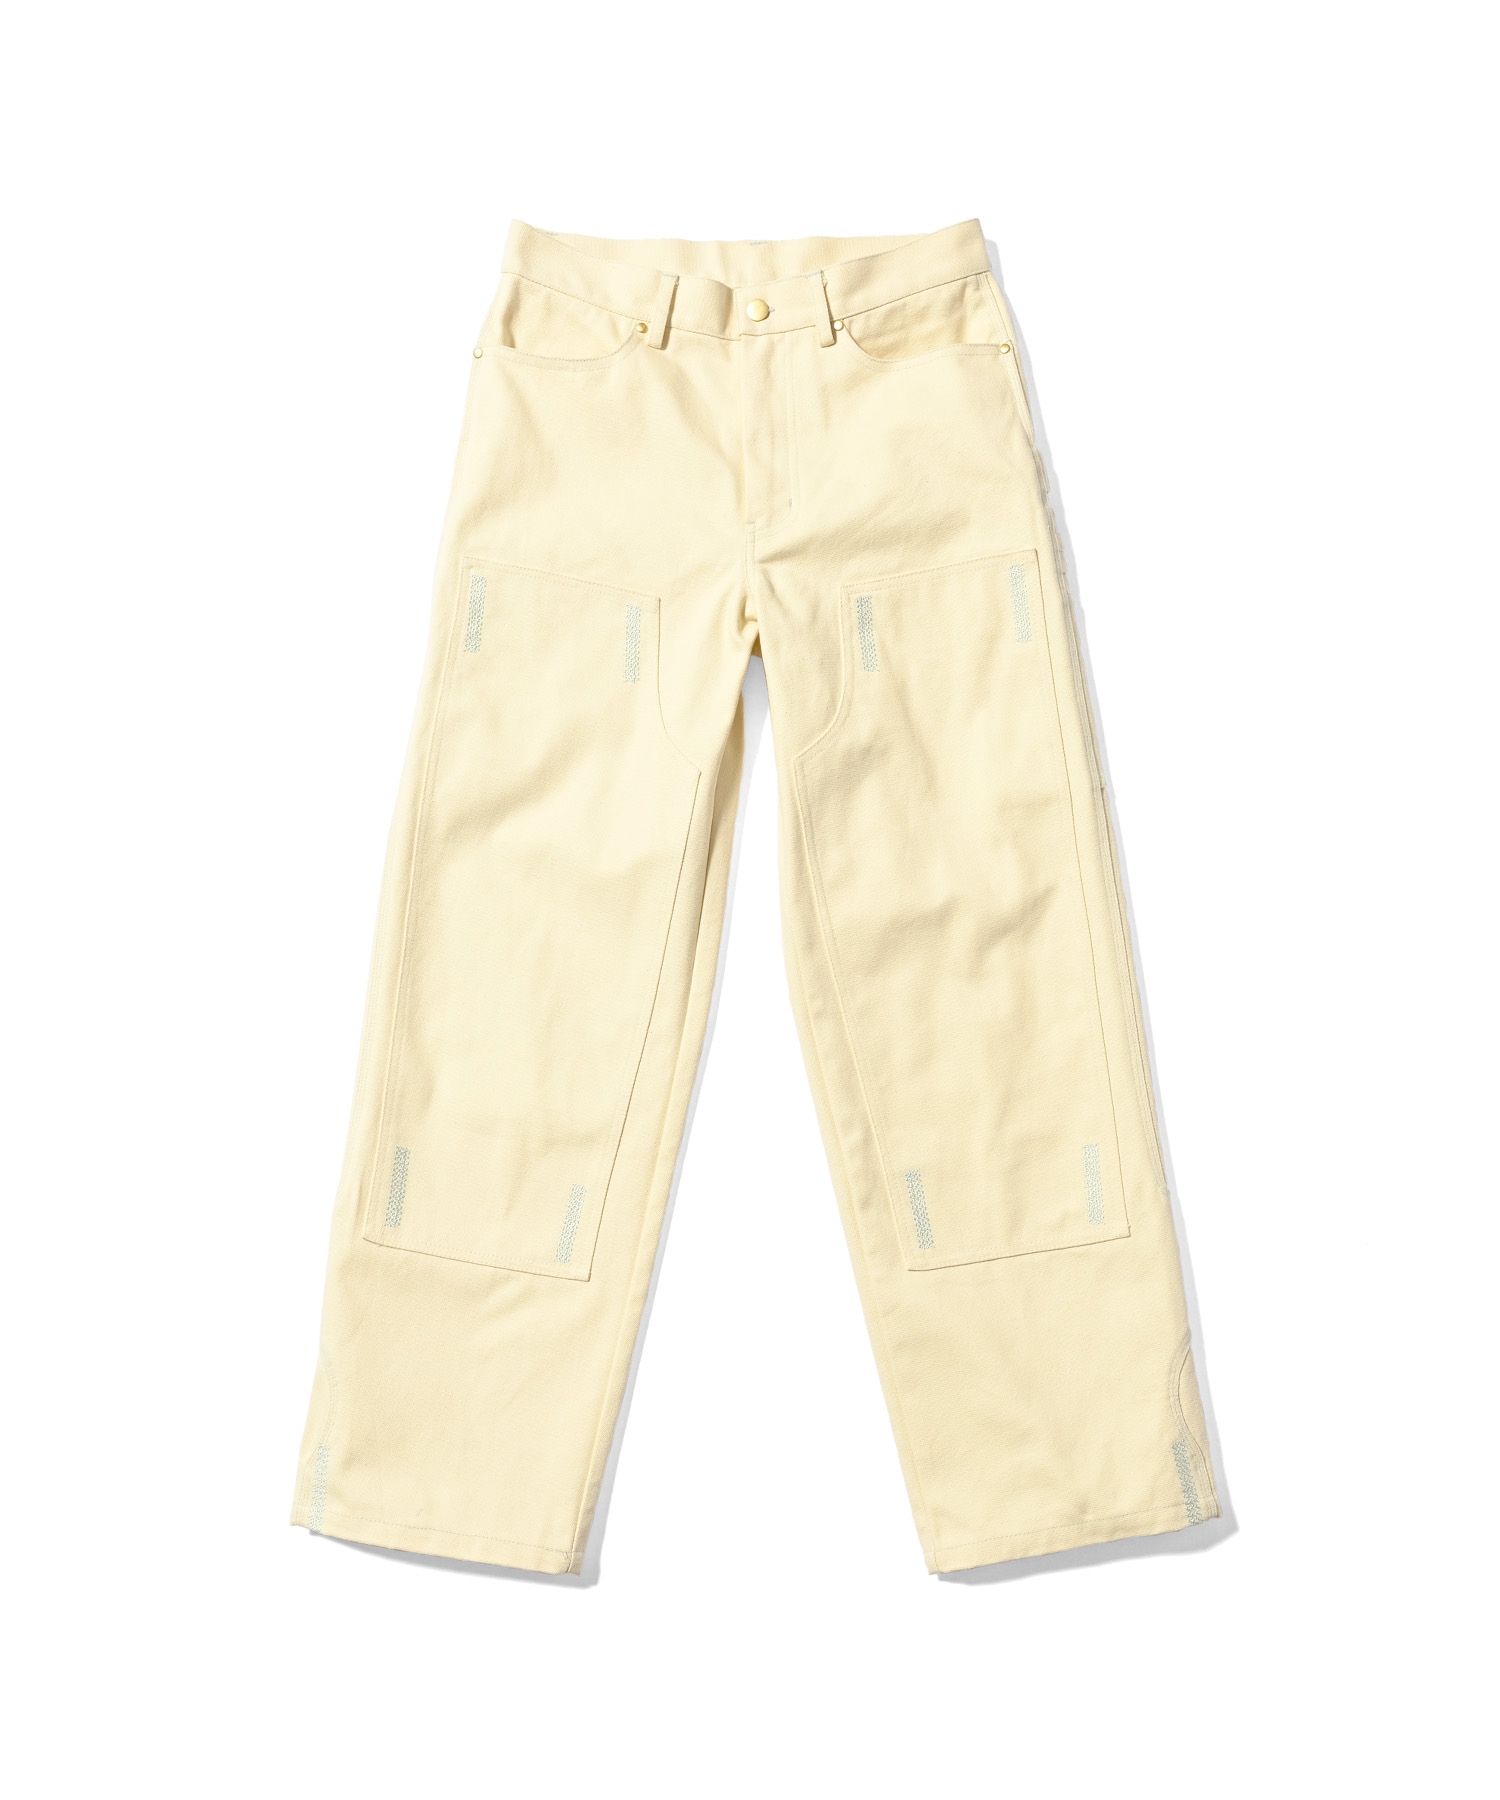 SAMPLES　DOUBLE KNEE PAINTER PANT　XL試着のみです